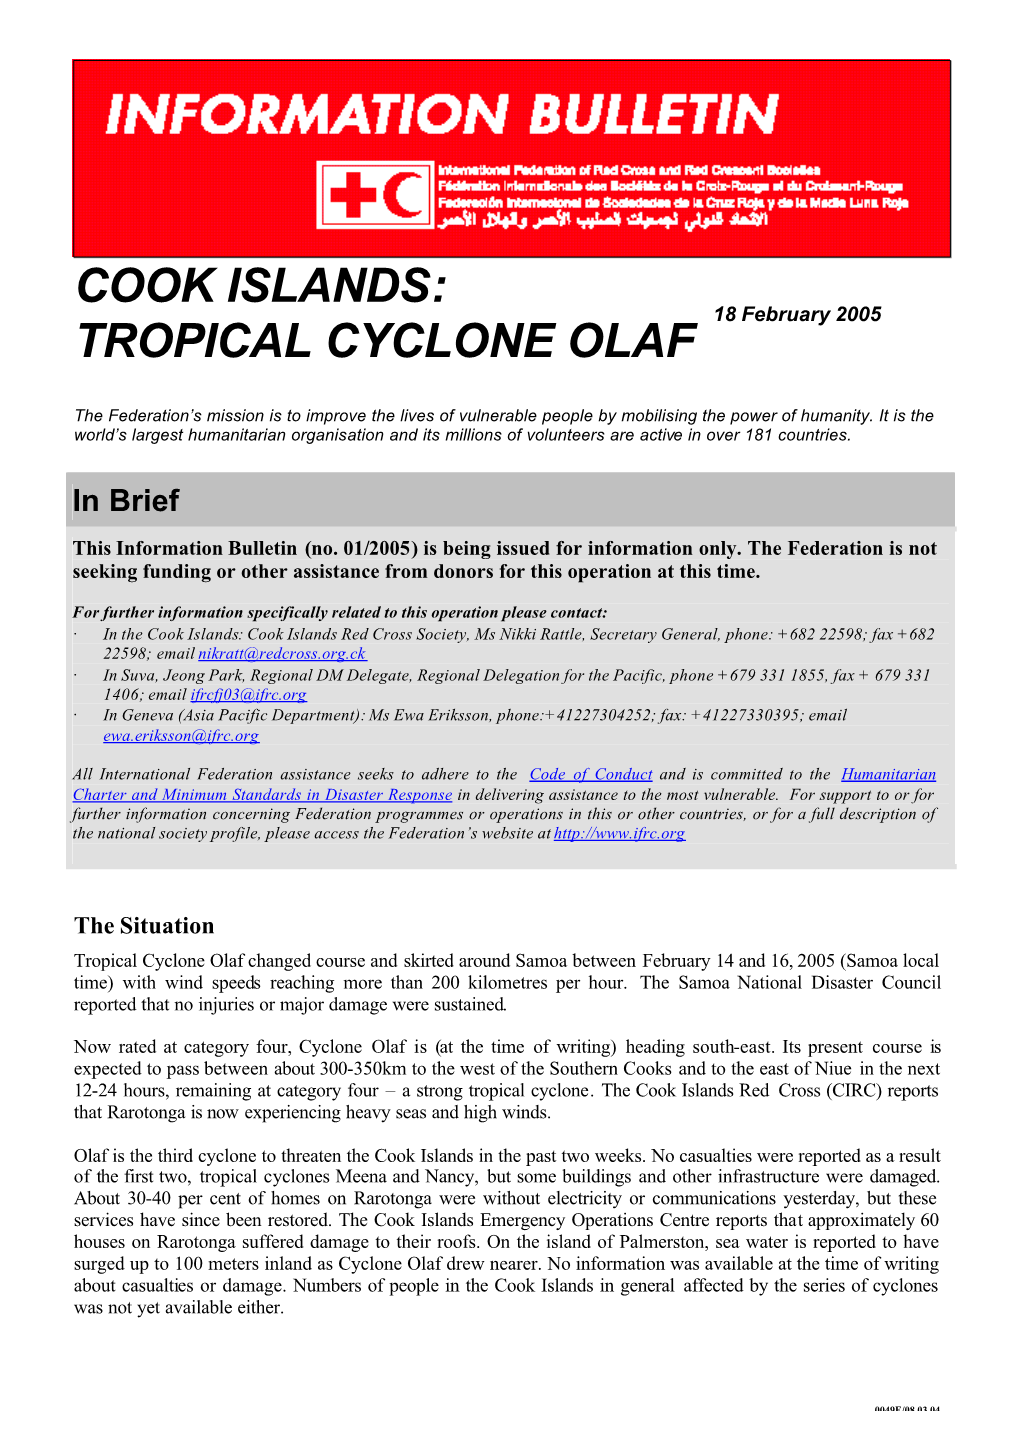 Cook Islands: Tropical Cyclone Olaf; Information Bulletin No